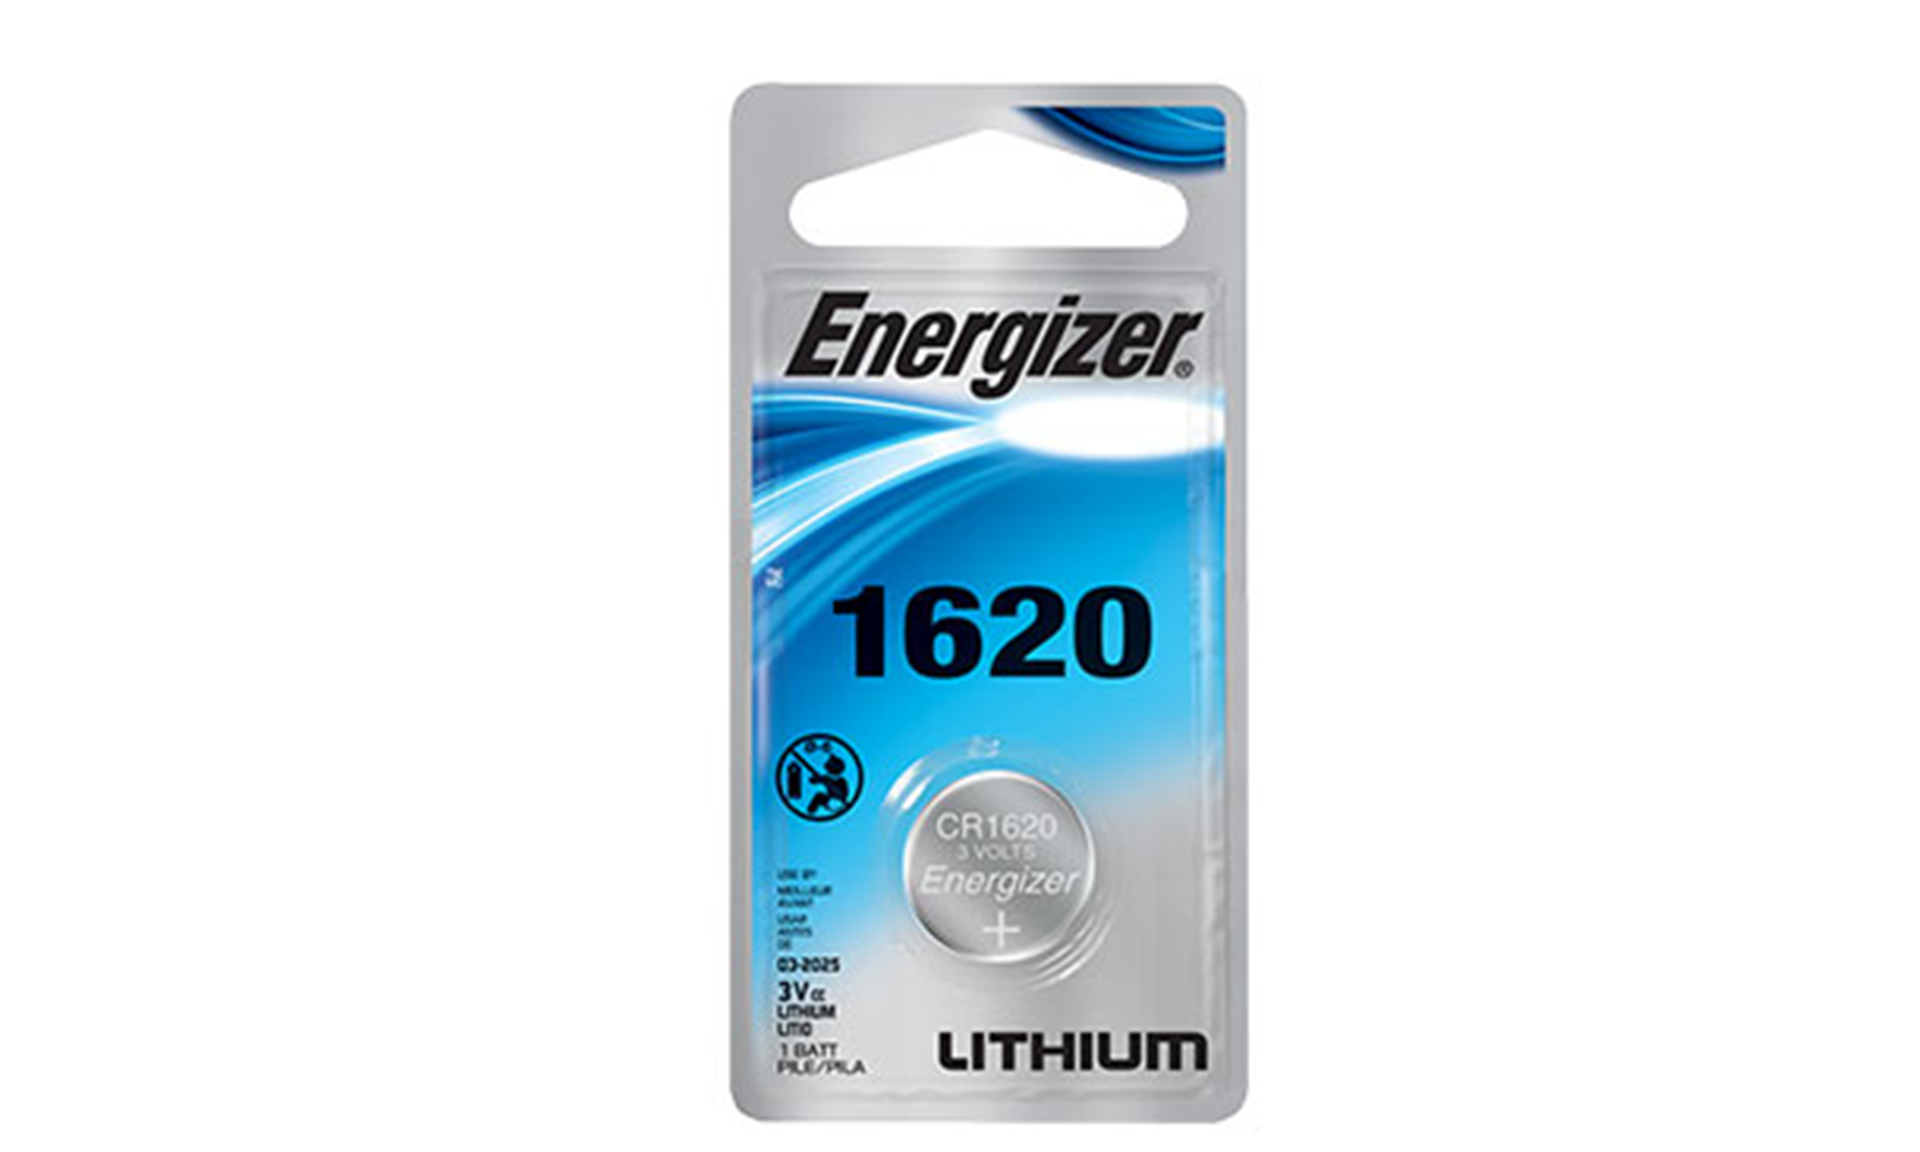 Energizer CR1620 Battery Lithium Coin Cell (1PC Blister Pack) (Child Resistant Packaging)